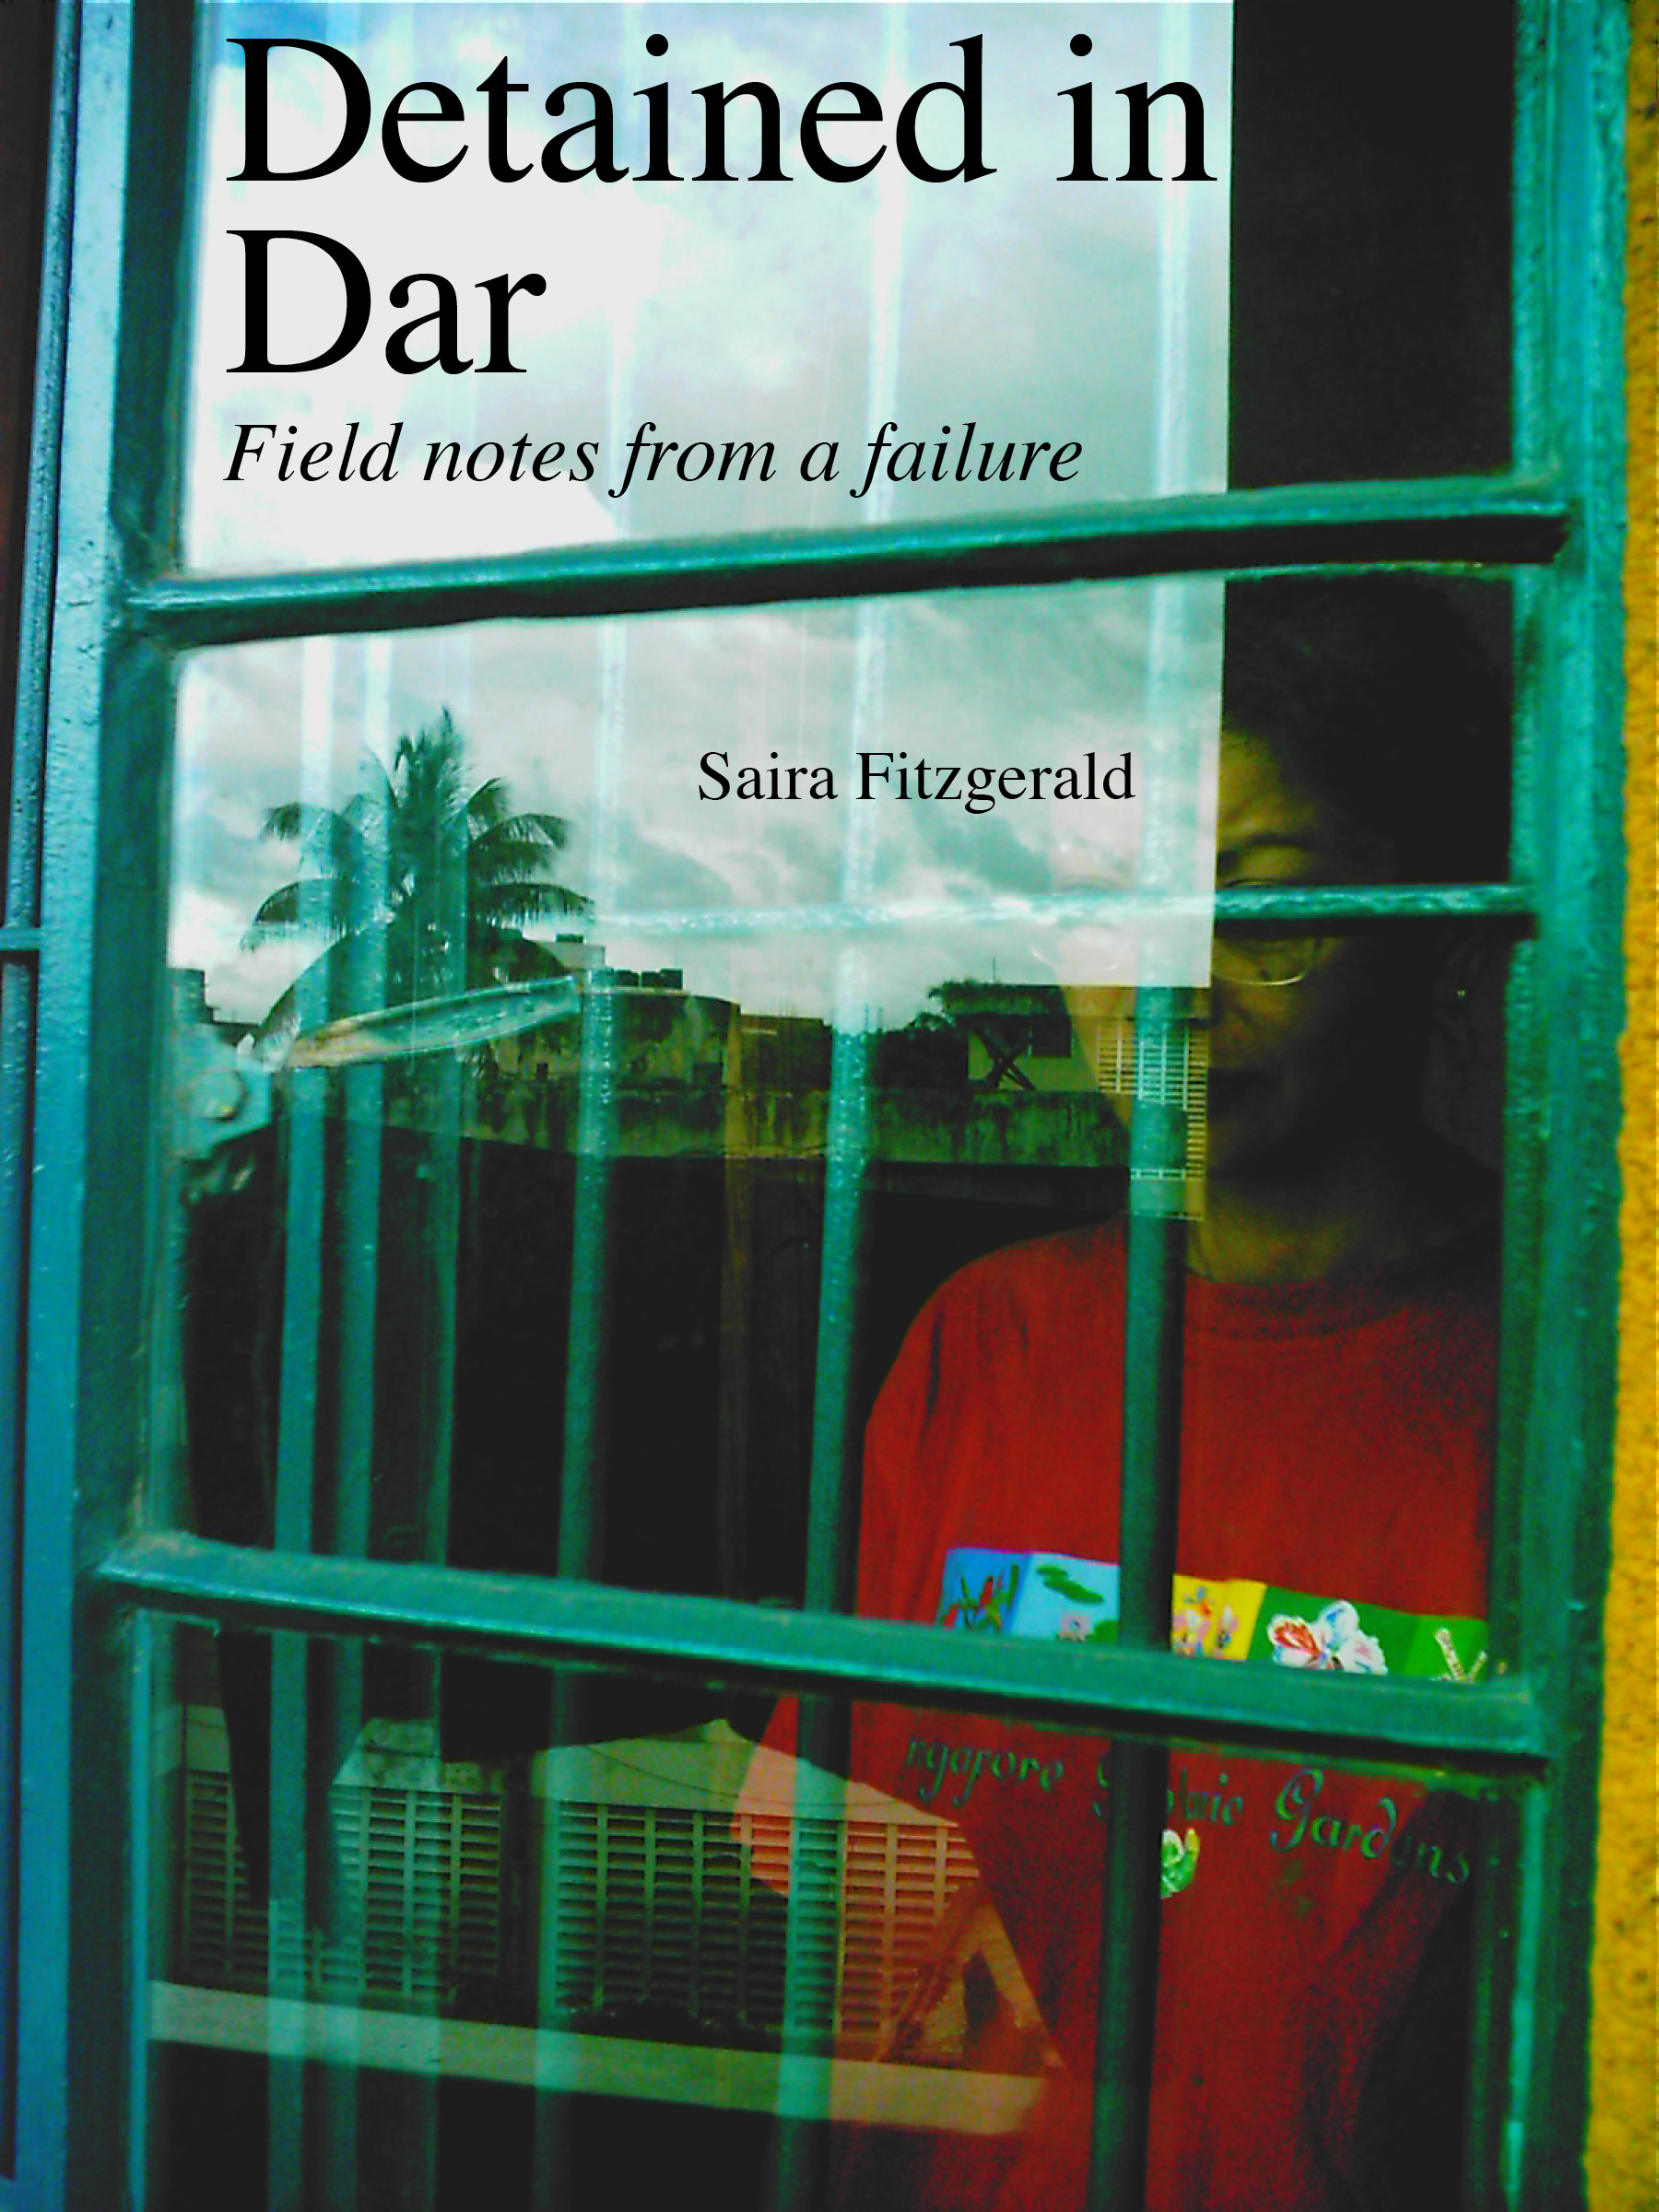 Cover of Saira's book, Detained in Dar